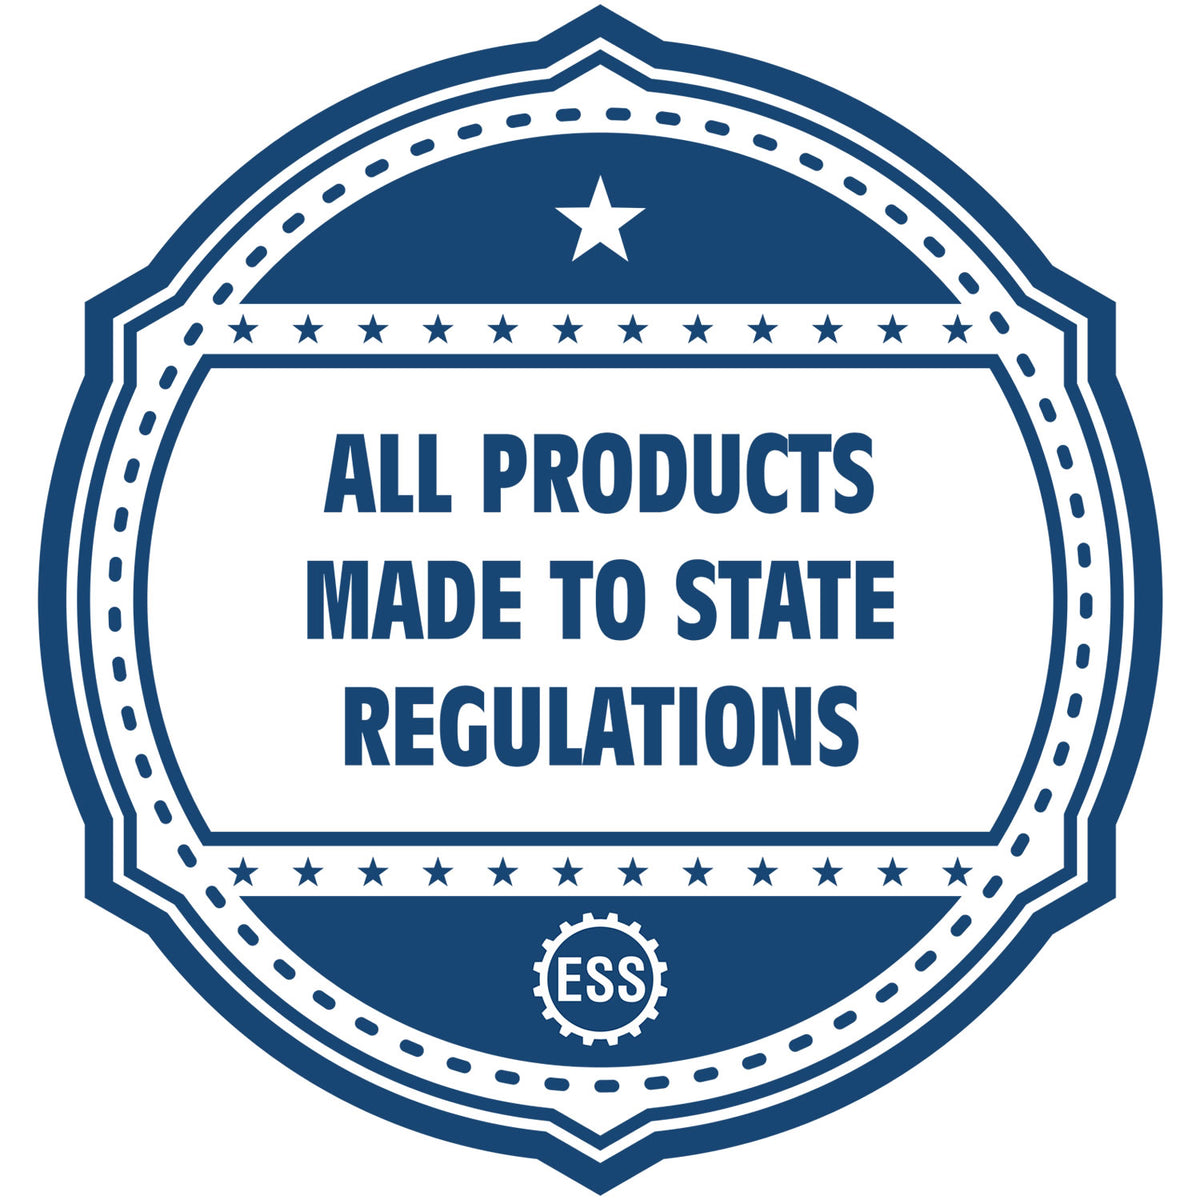 An icon or badge element for the Heavy-Duty Virginia Rectangular Notary Stamp showing that this product is made in compliance with state regulations.